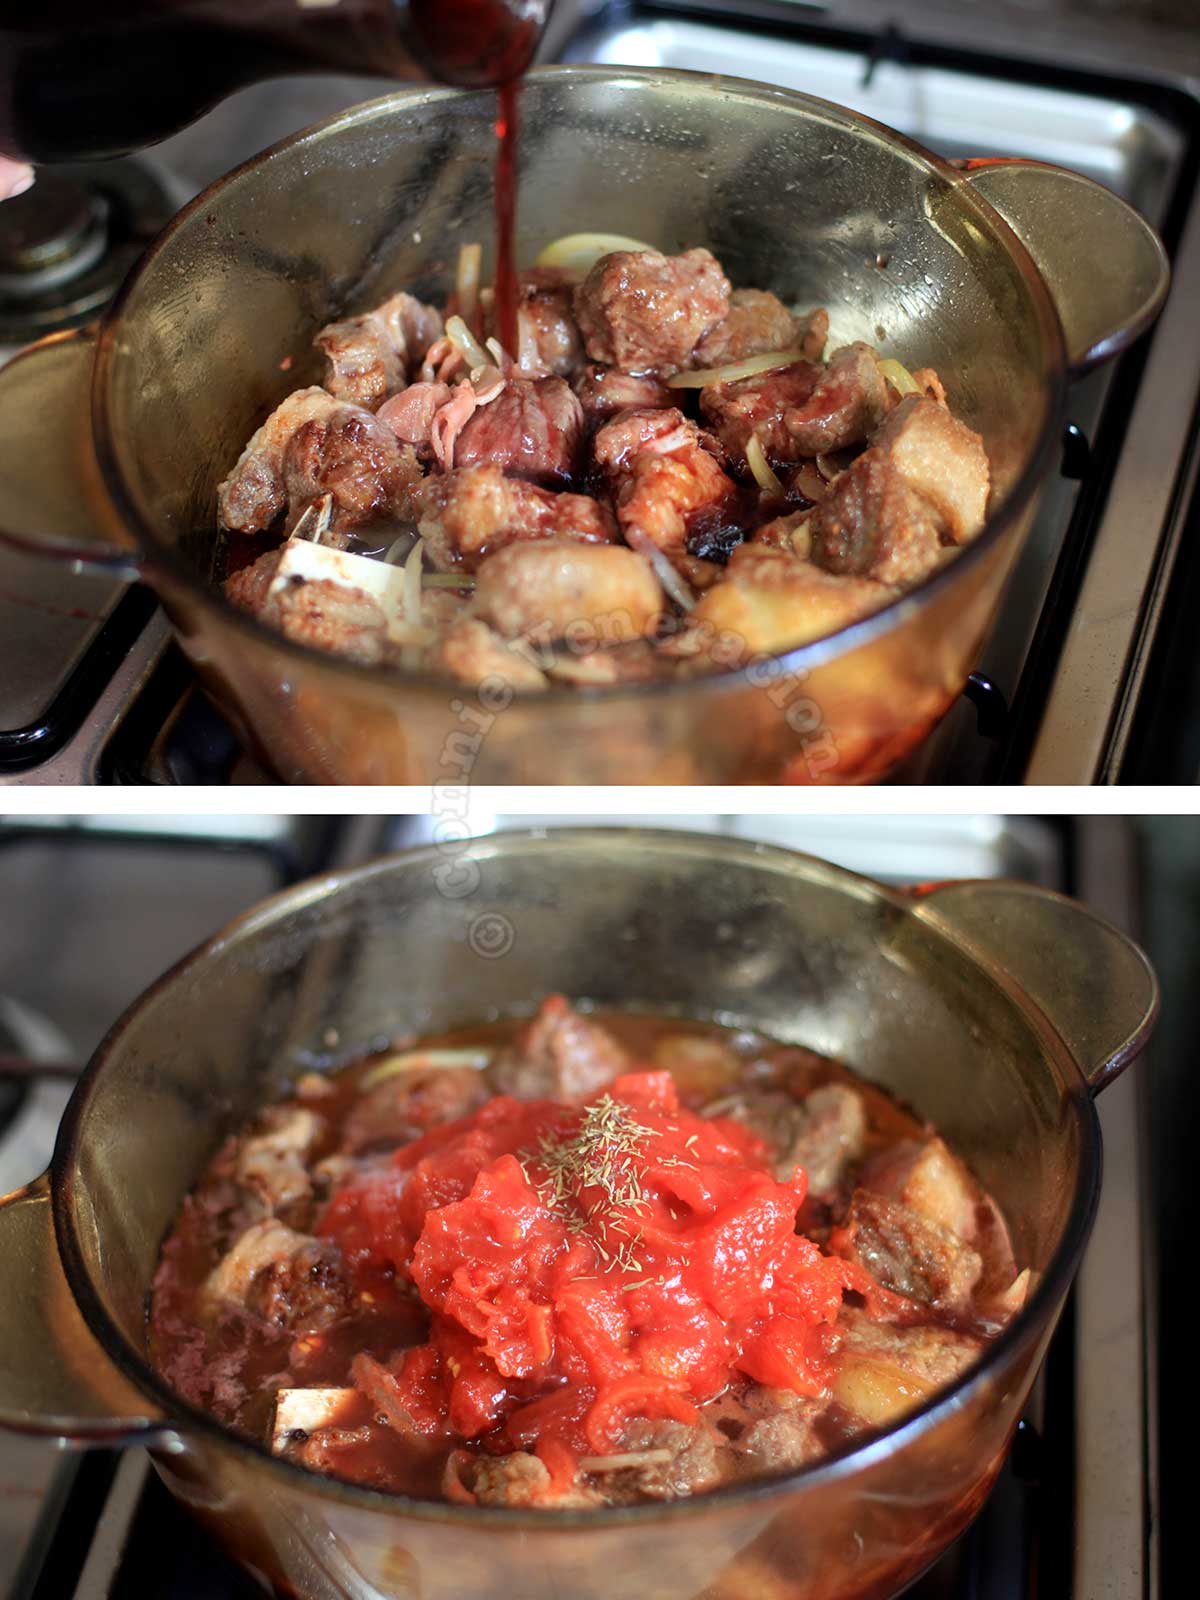 Pouring wine, and adding tomatoes and herbs to beef in pot